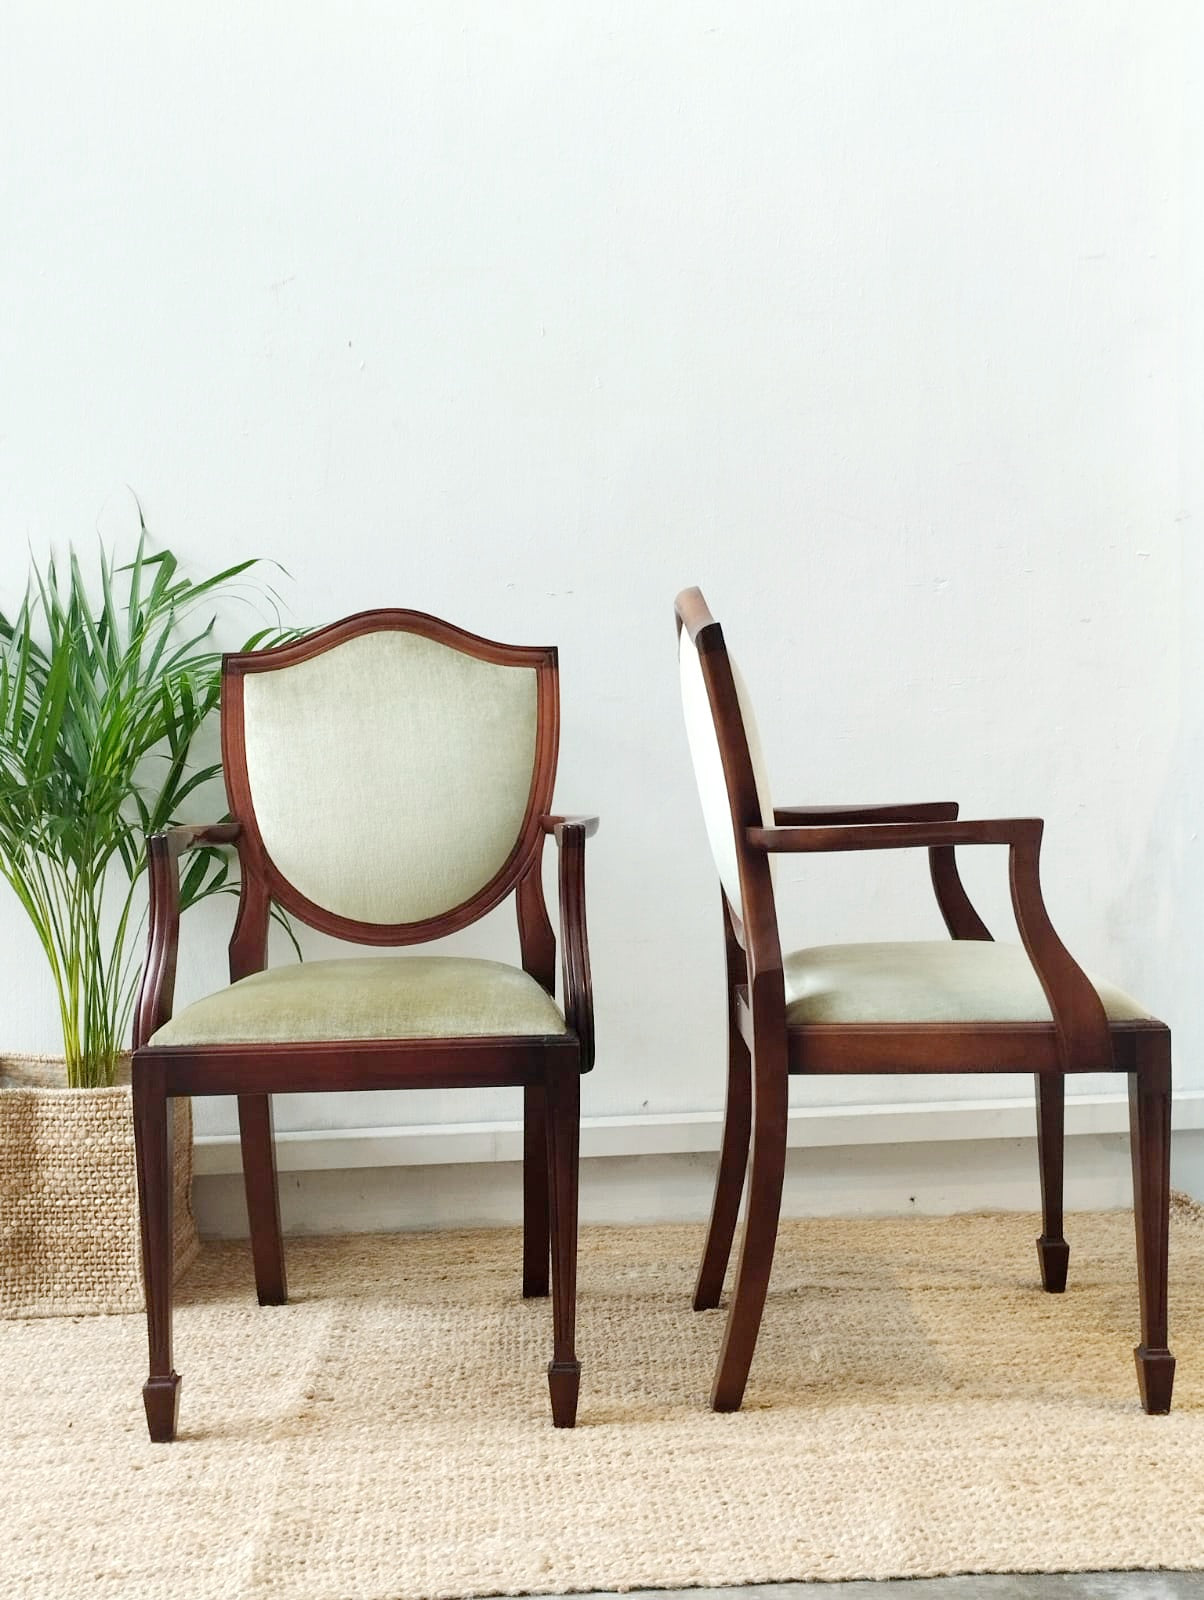 Vintage Mahogany Craver chair by Reputable furniture maker Bridgecraft  A beautiful pair of craver chair in Jade green Velvet seat